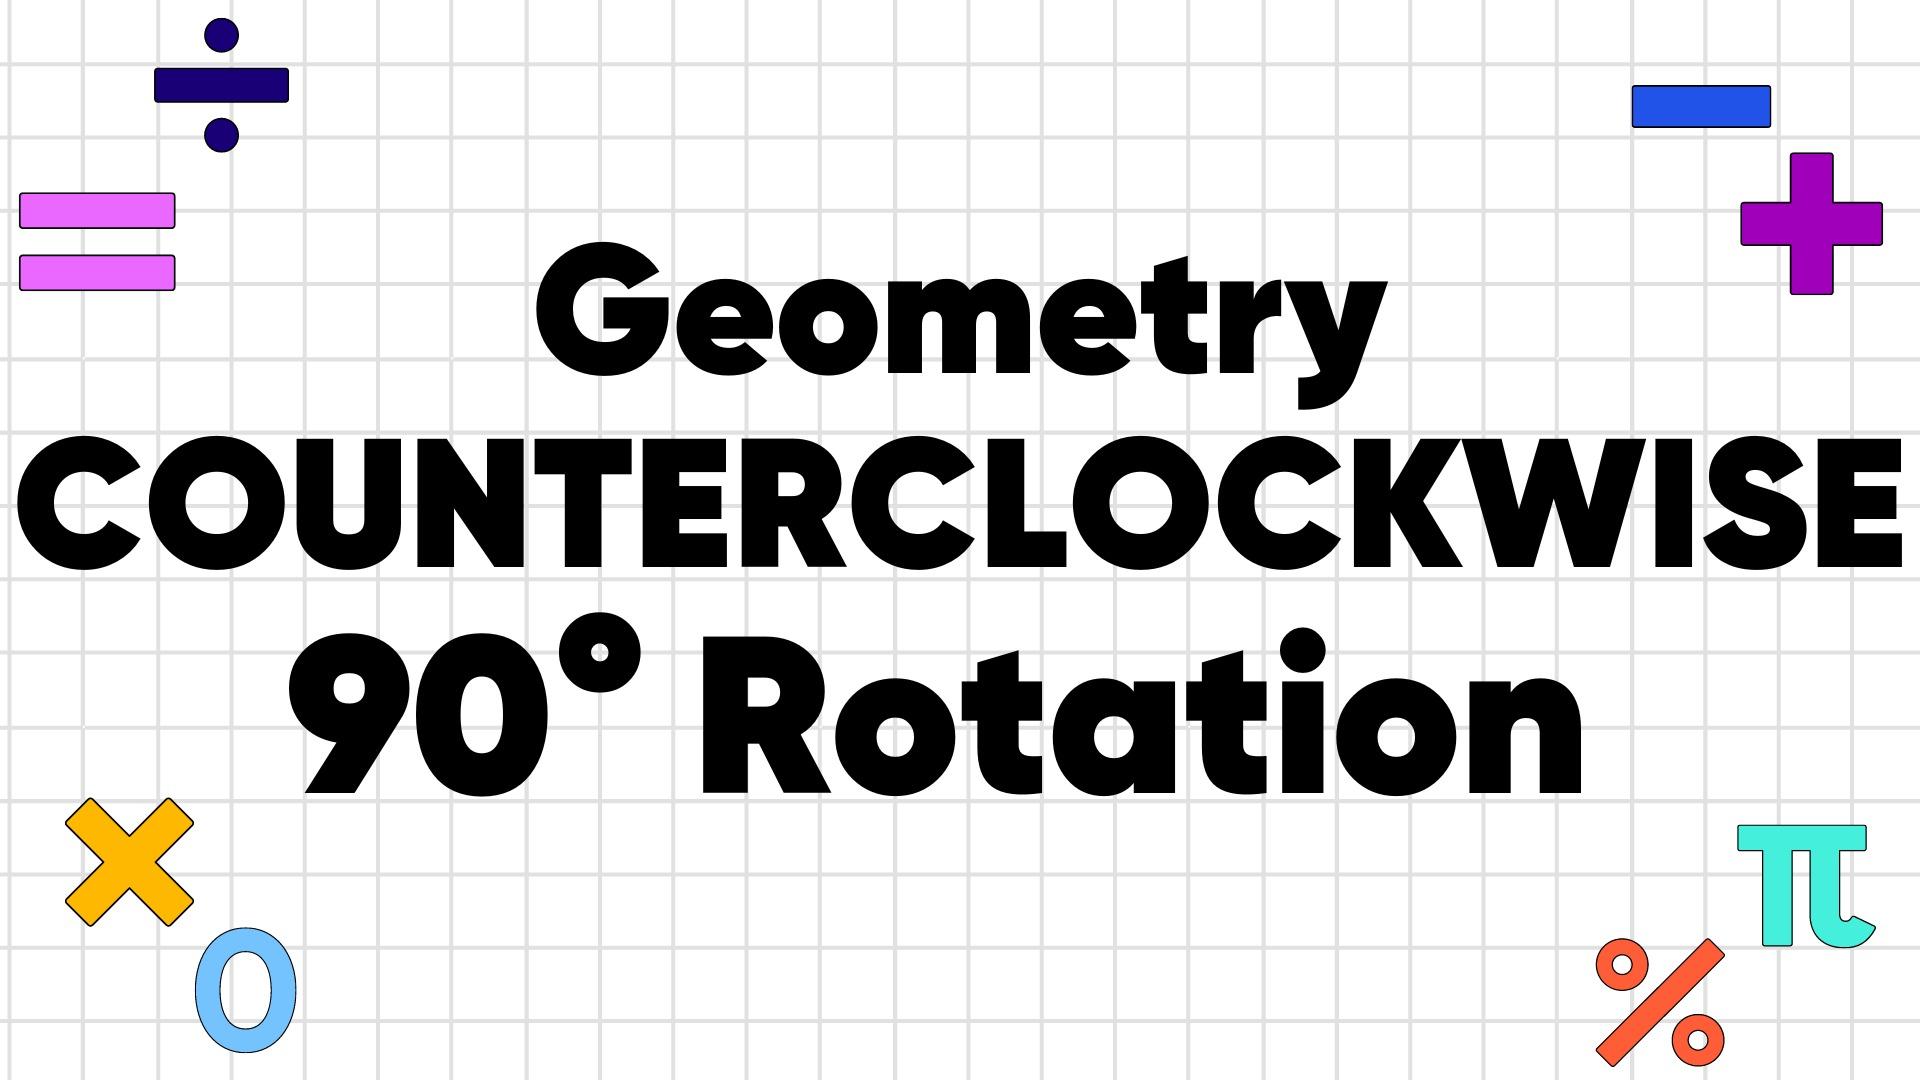 How to do a Counterclockwise Rotation of a Figure 90 Degrees